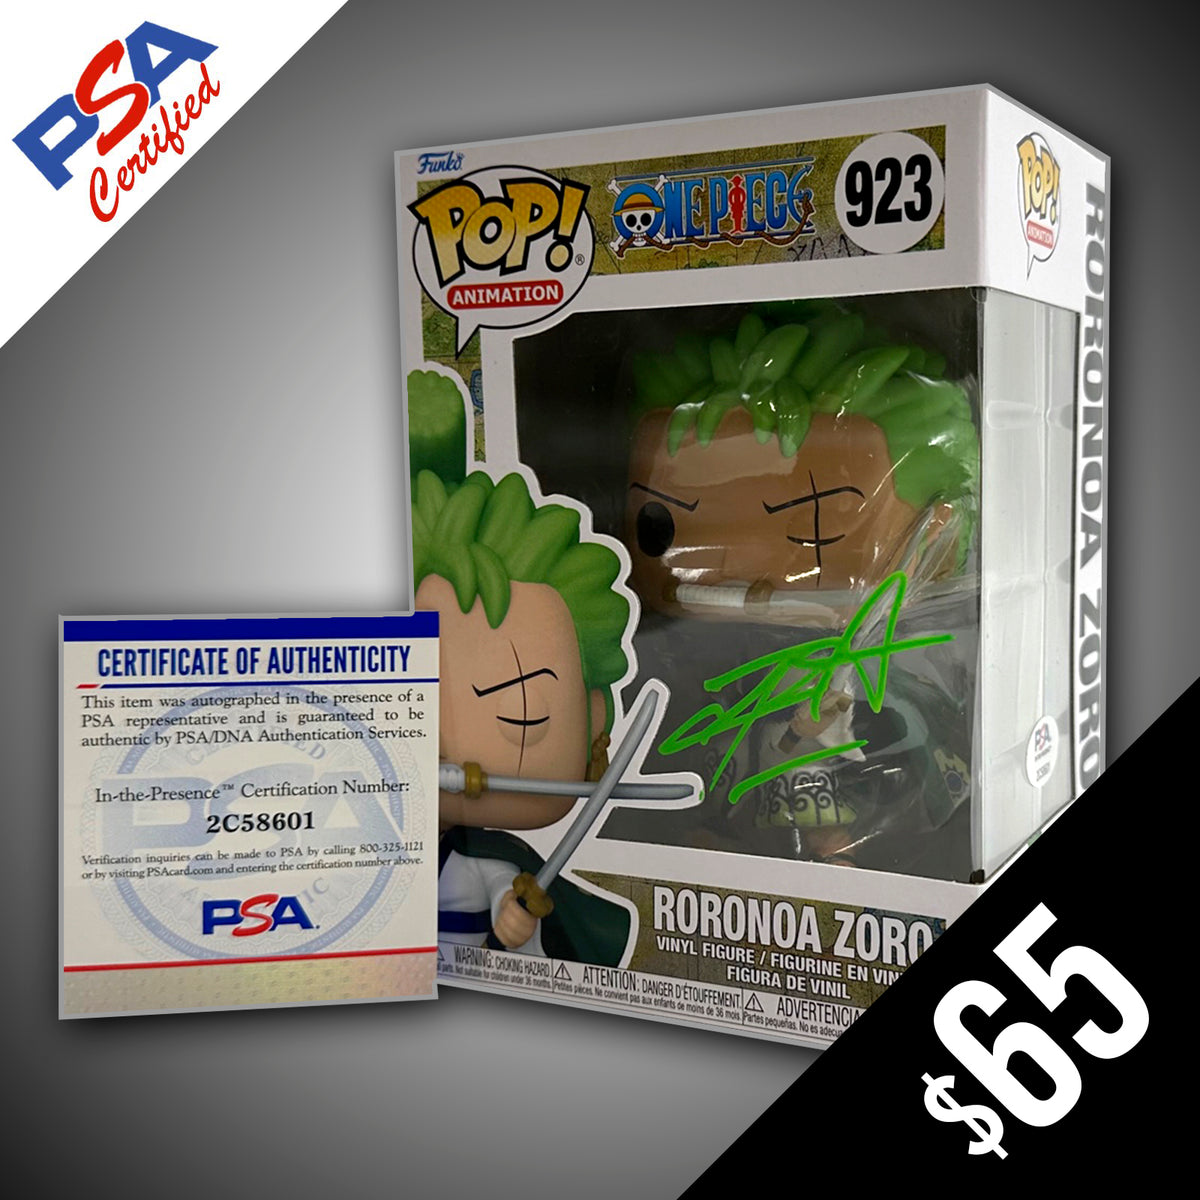 Funko Pop! - One Piece: Zoro Enma #1288 SIGNED by Christopher Sabat (PSA  Certified) (Yellow Signature)